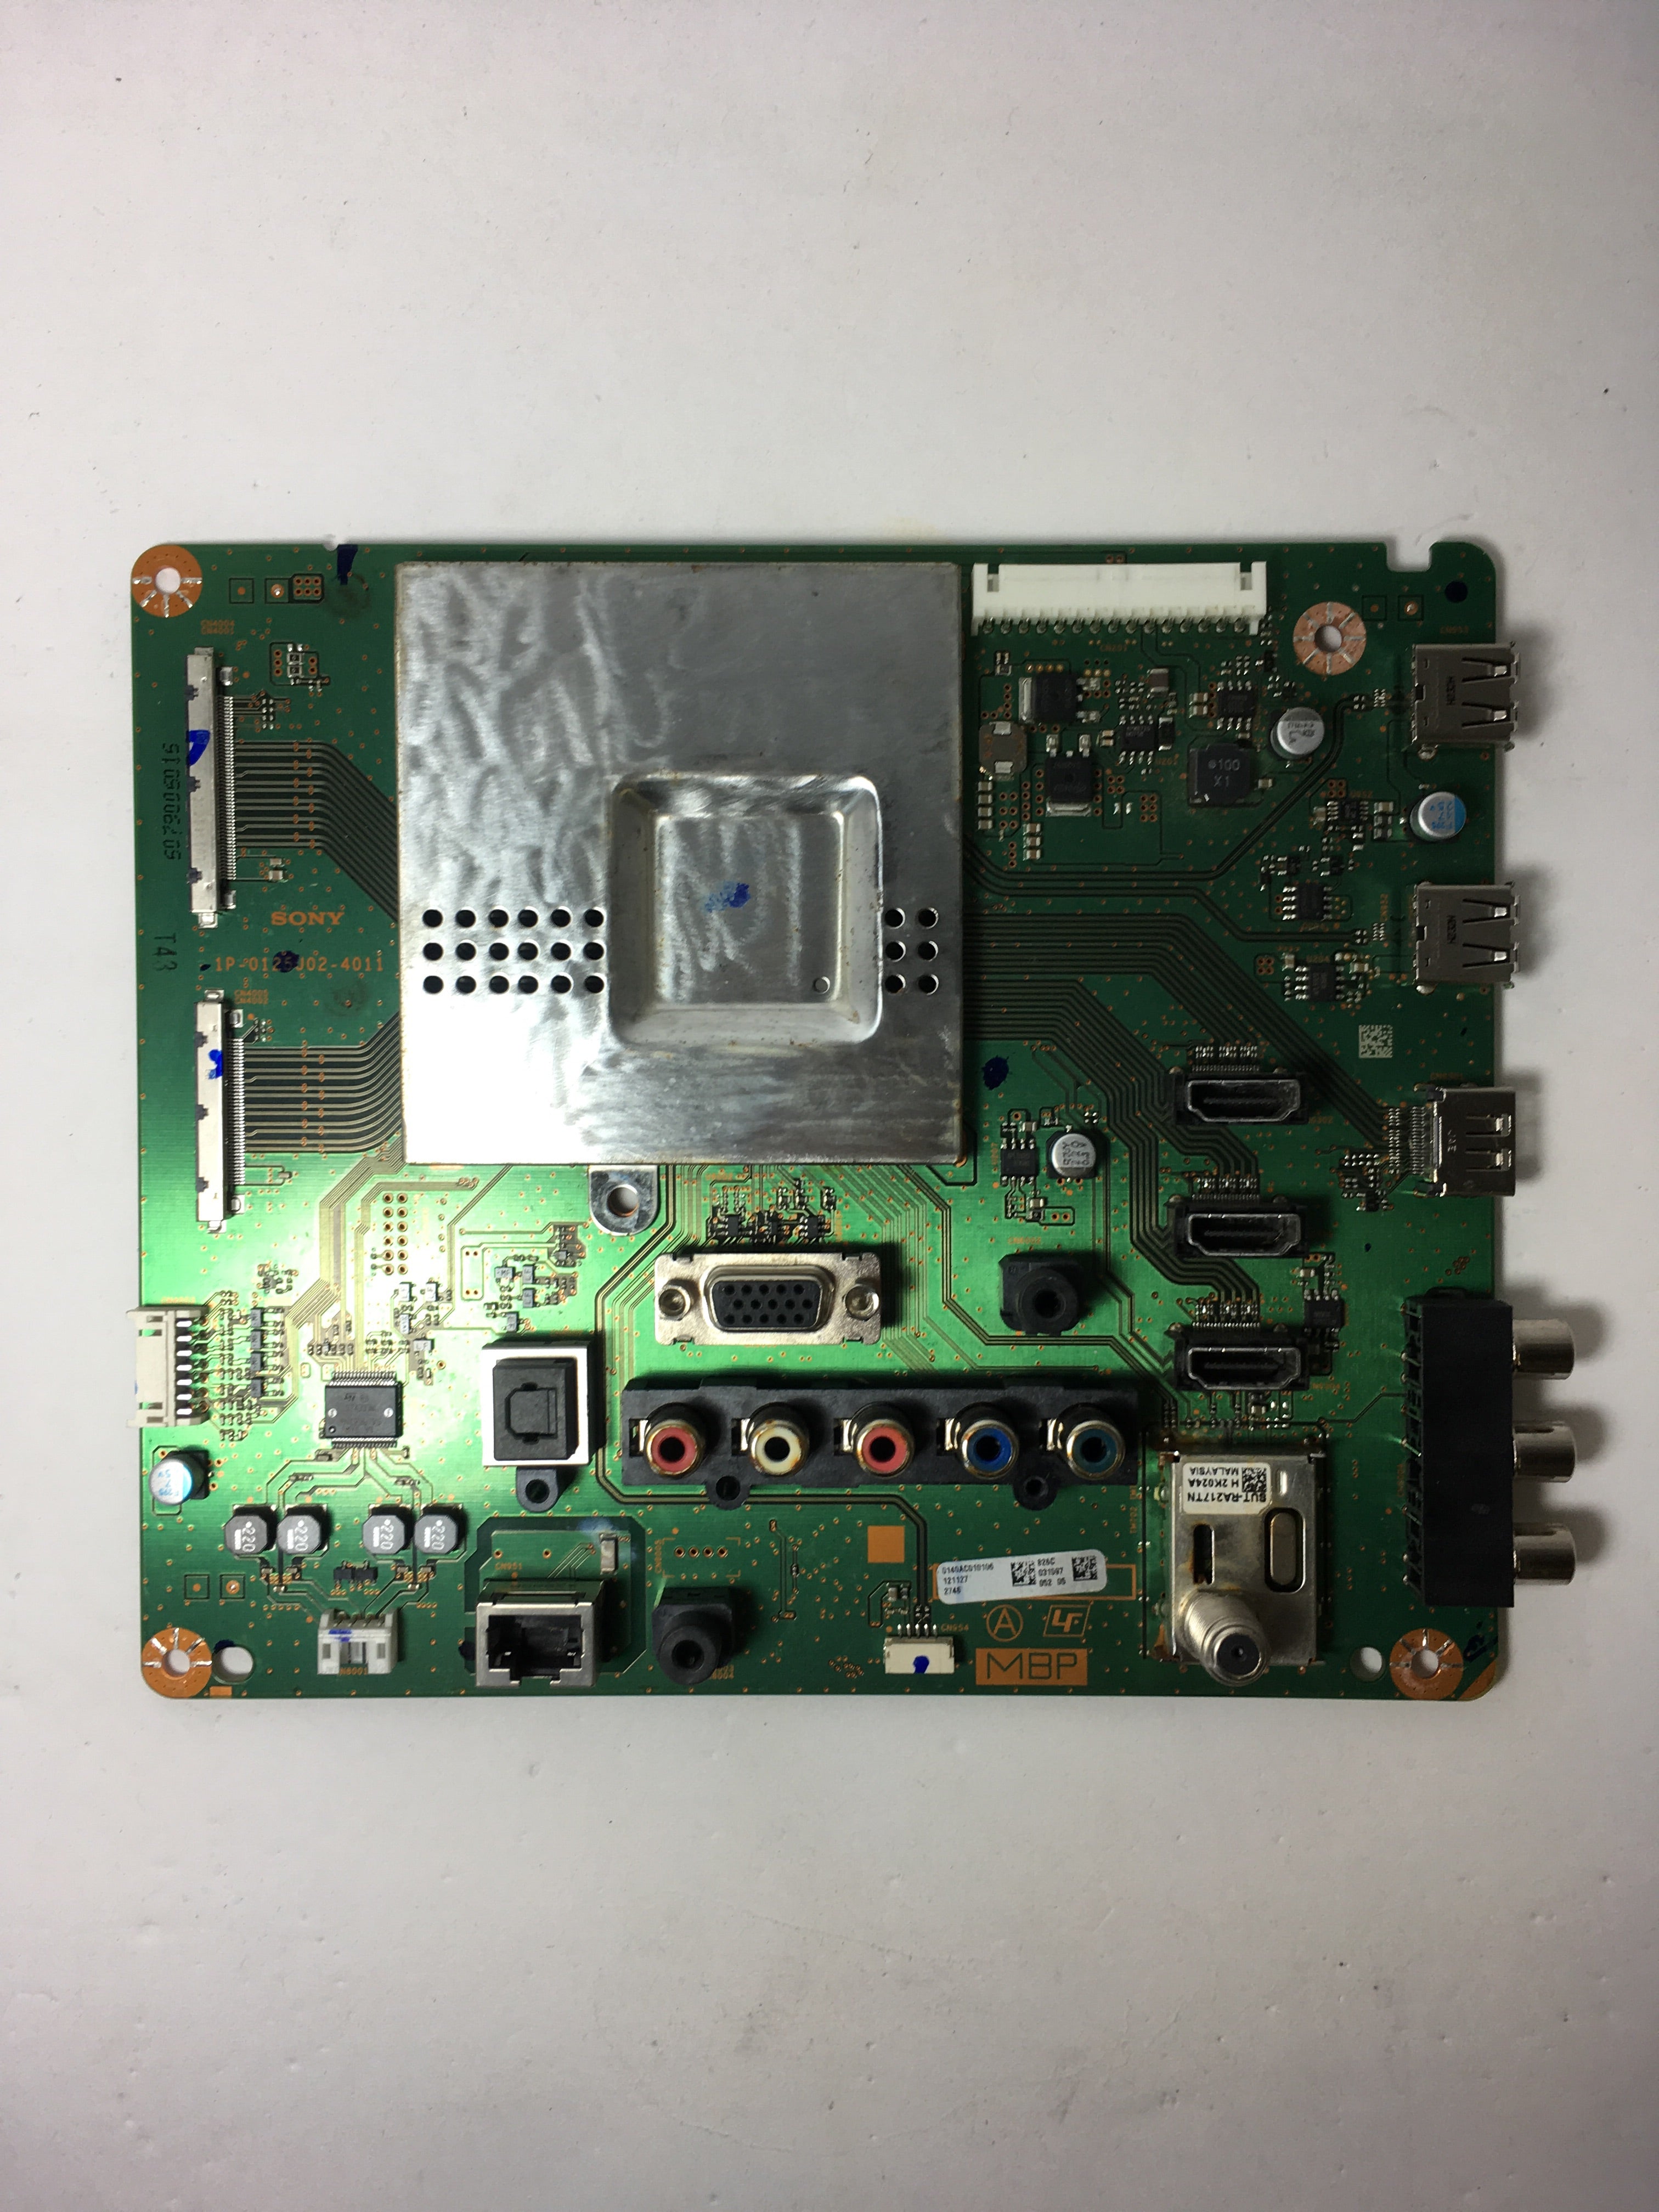 Sony 1-895-307-11 MBP Board (MUST UPGRADE SOFTWARE!)